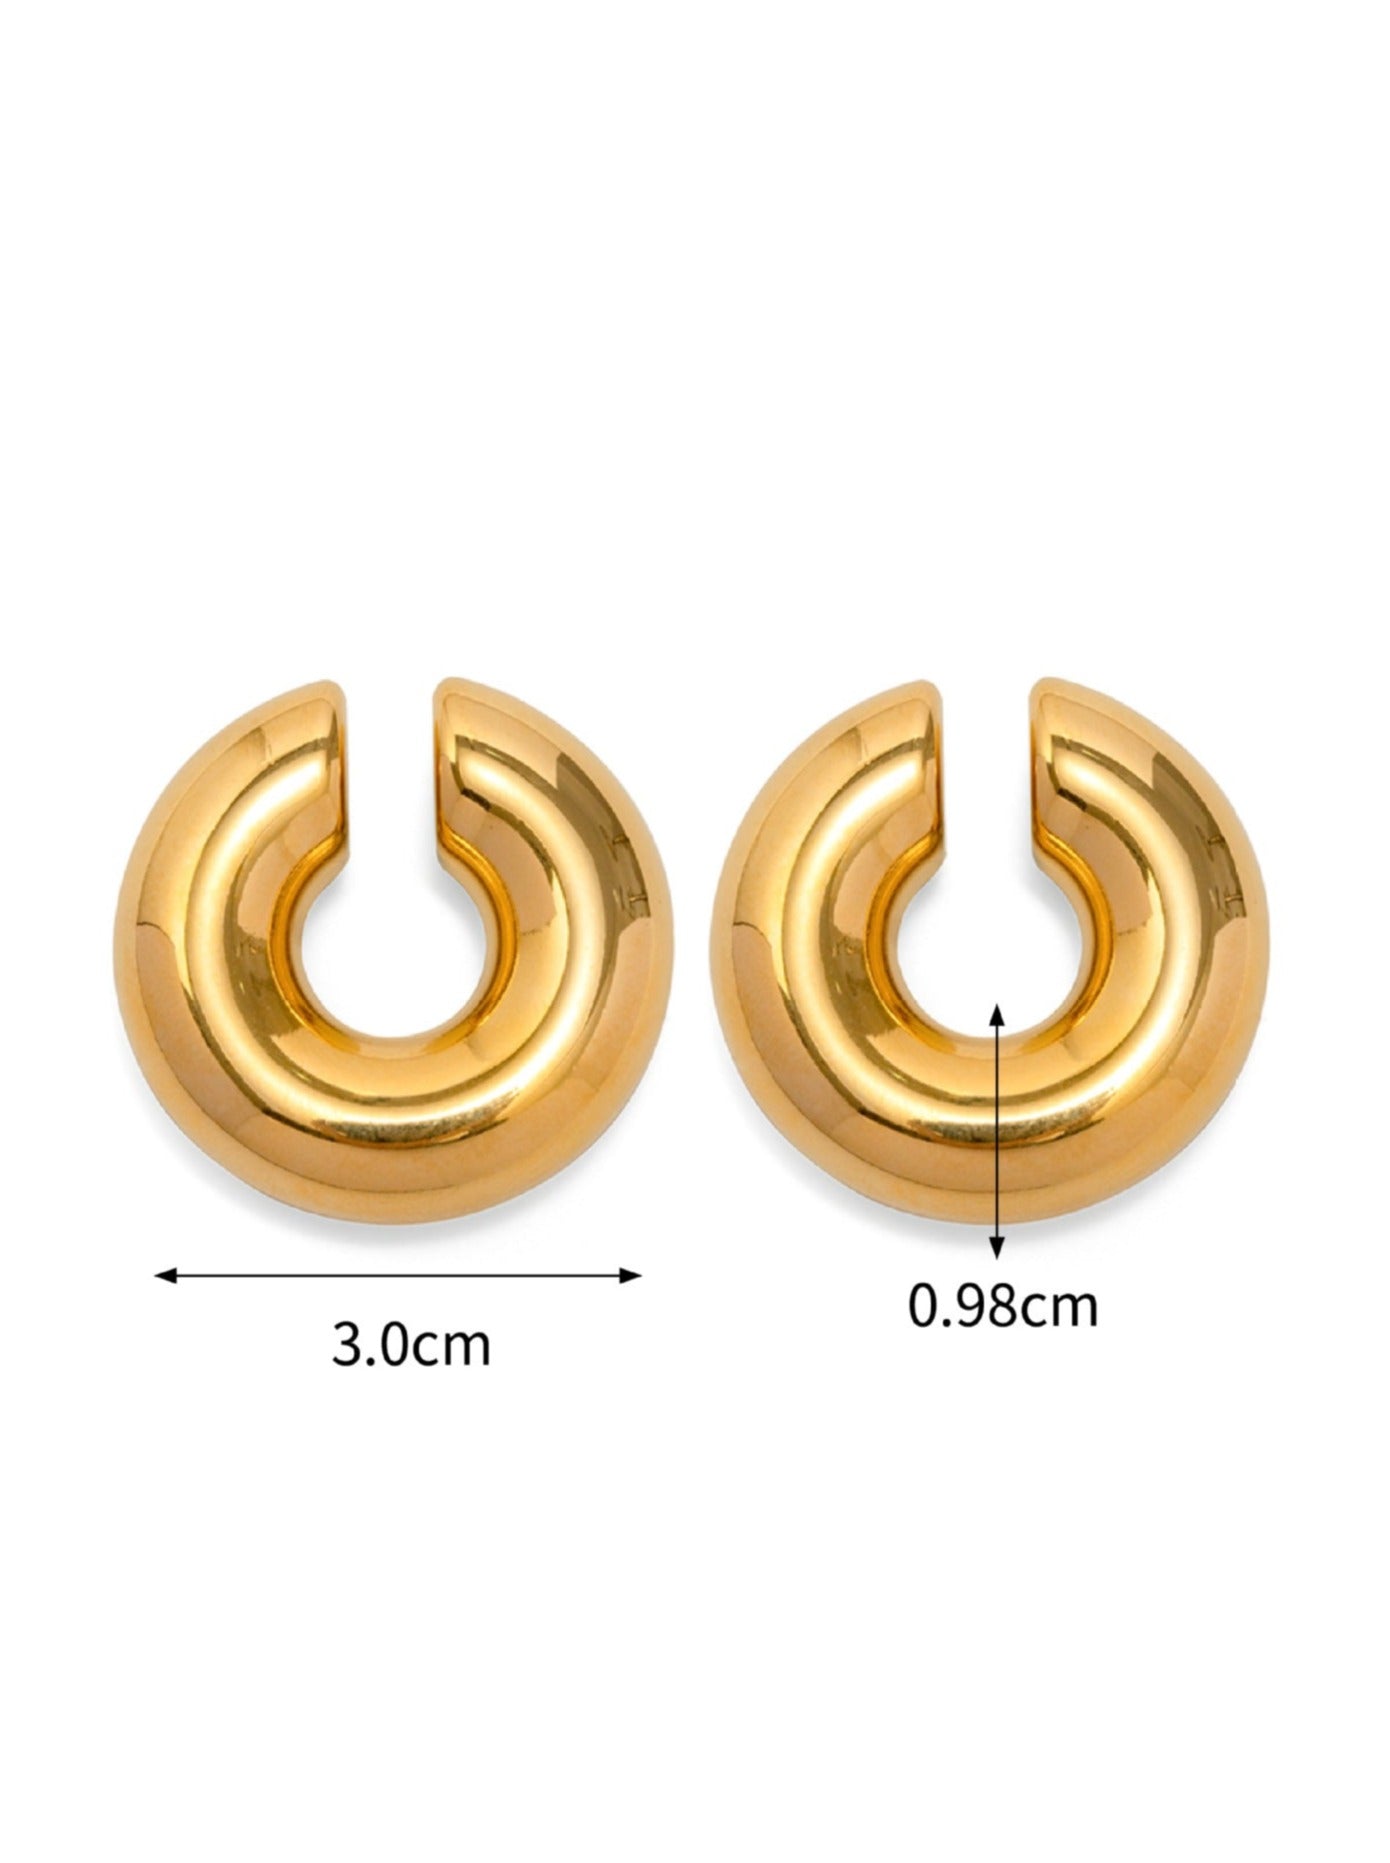 Stainless Steel Cylindrical Hollow Tube Earring Clips